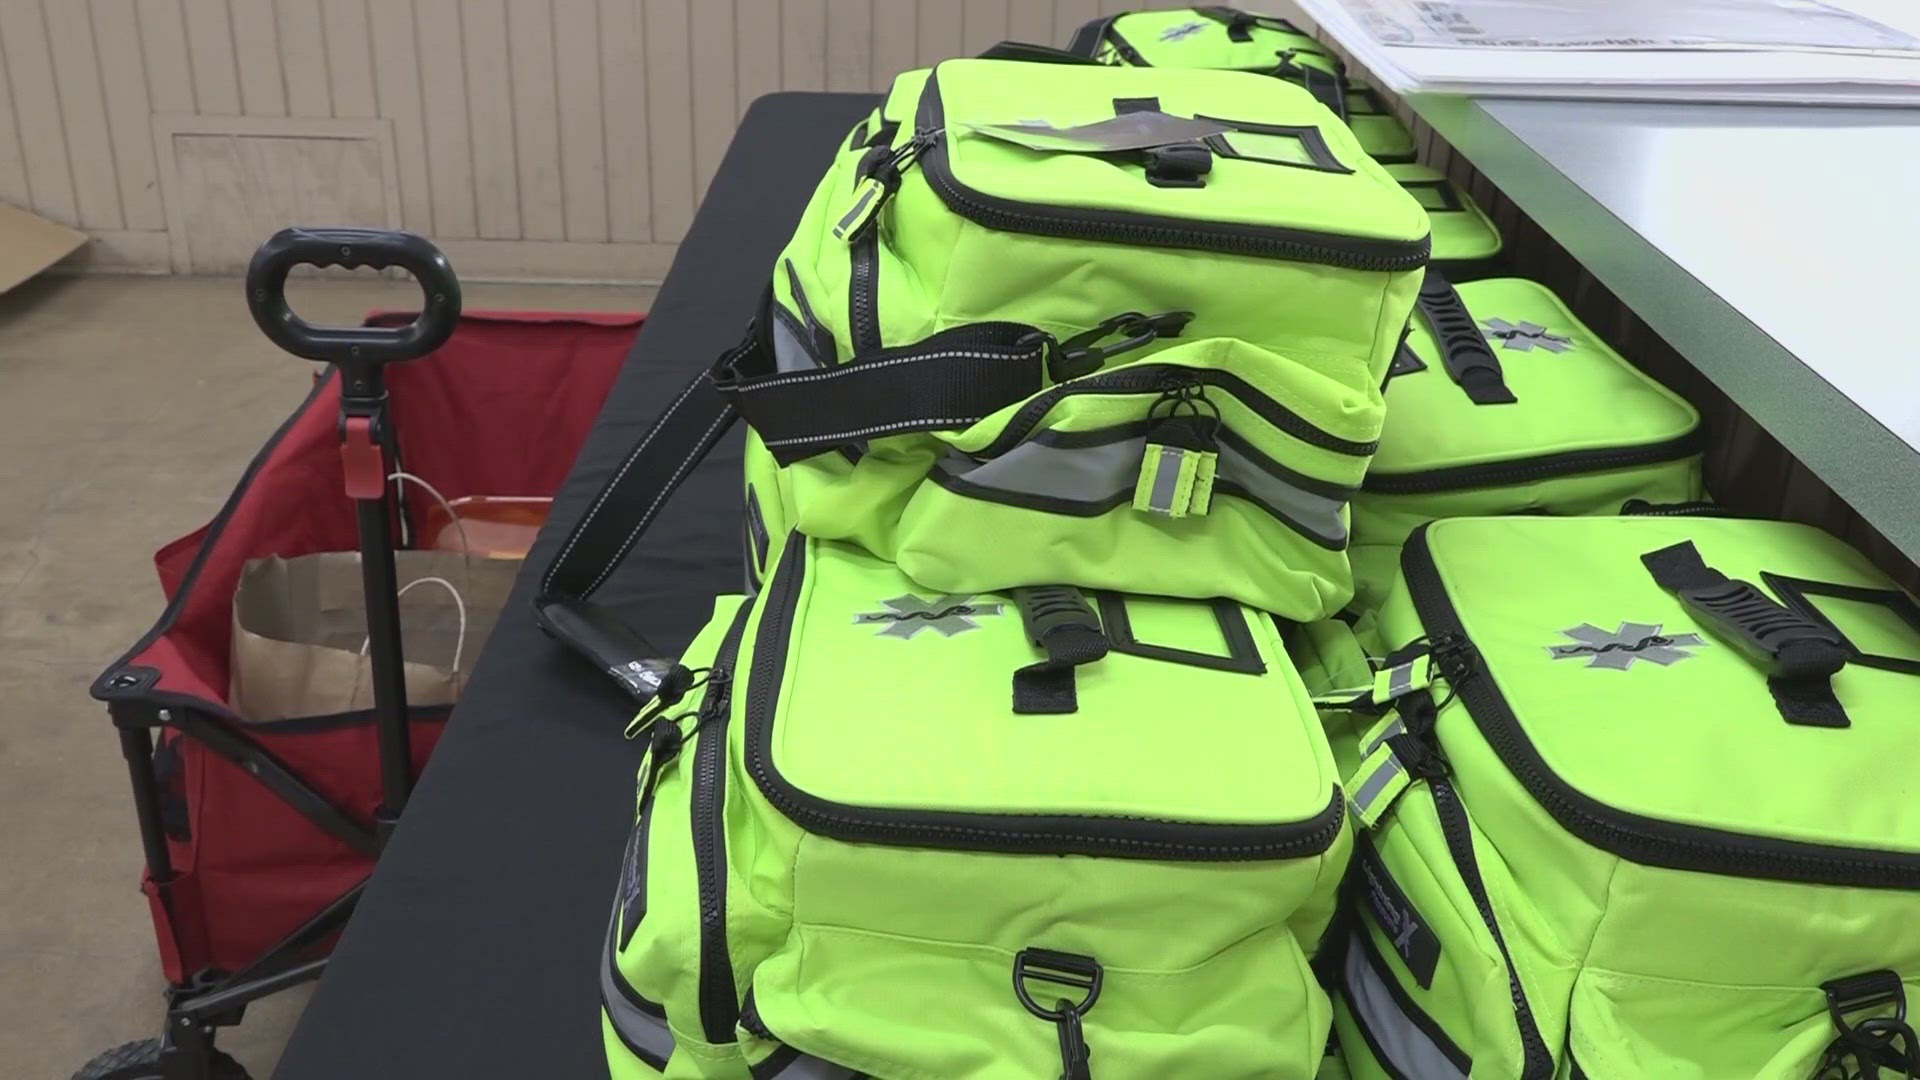 New kits in Wilson County helping render aid while officials wait for EMS to arrive